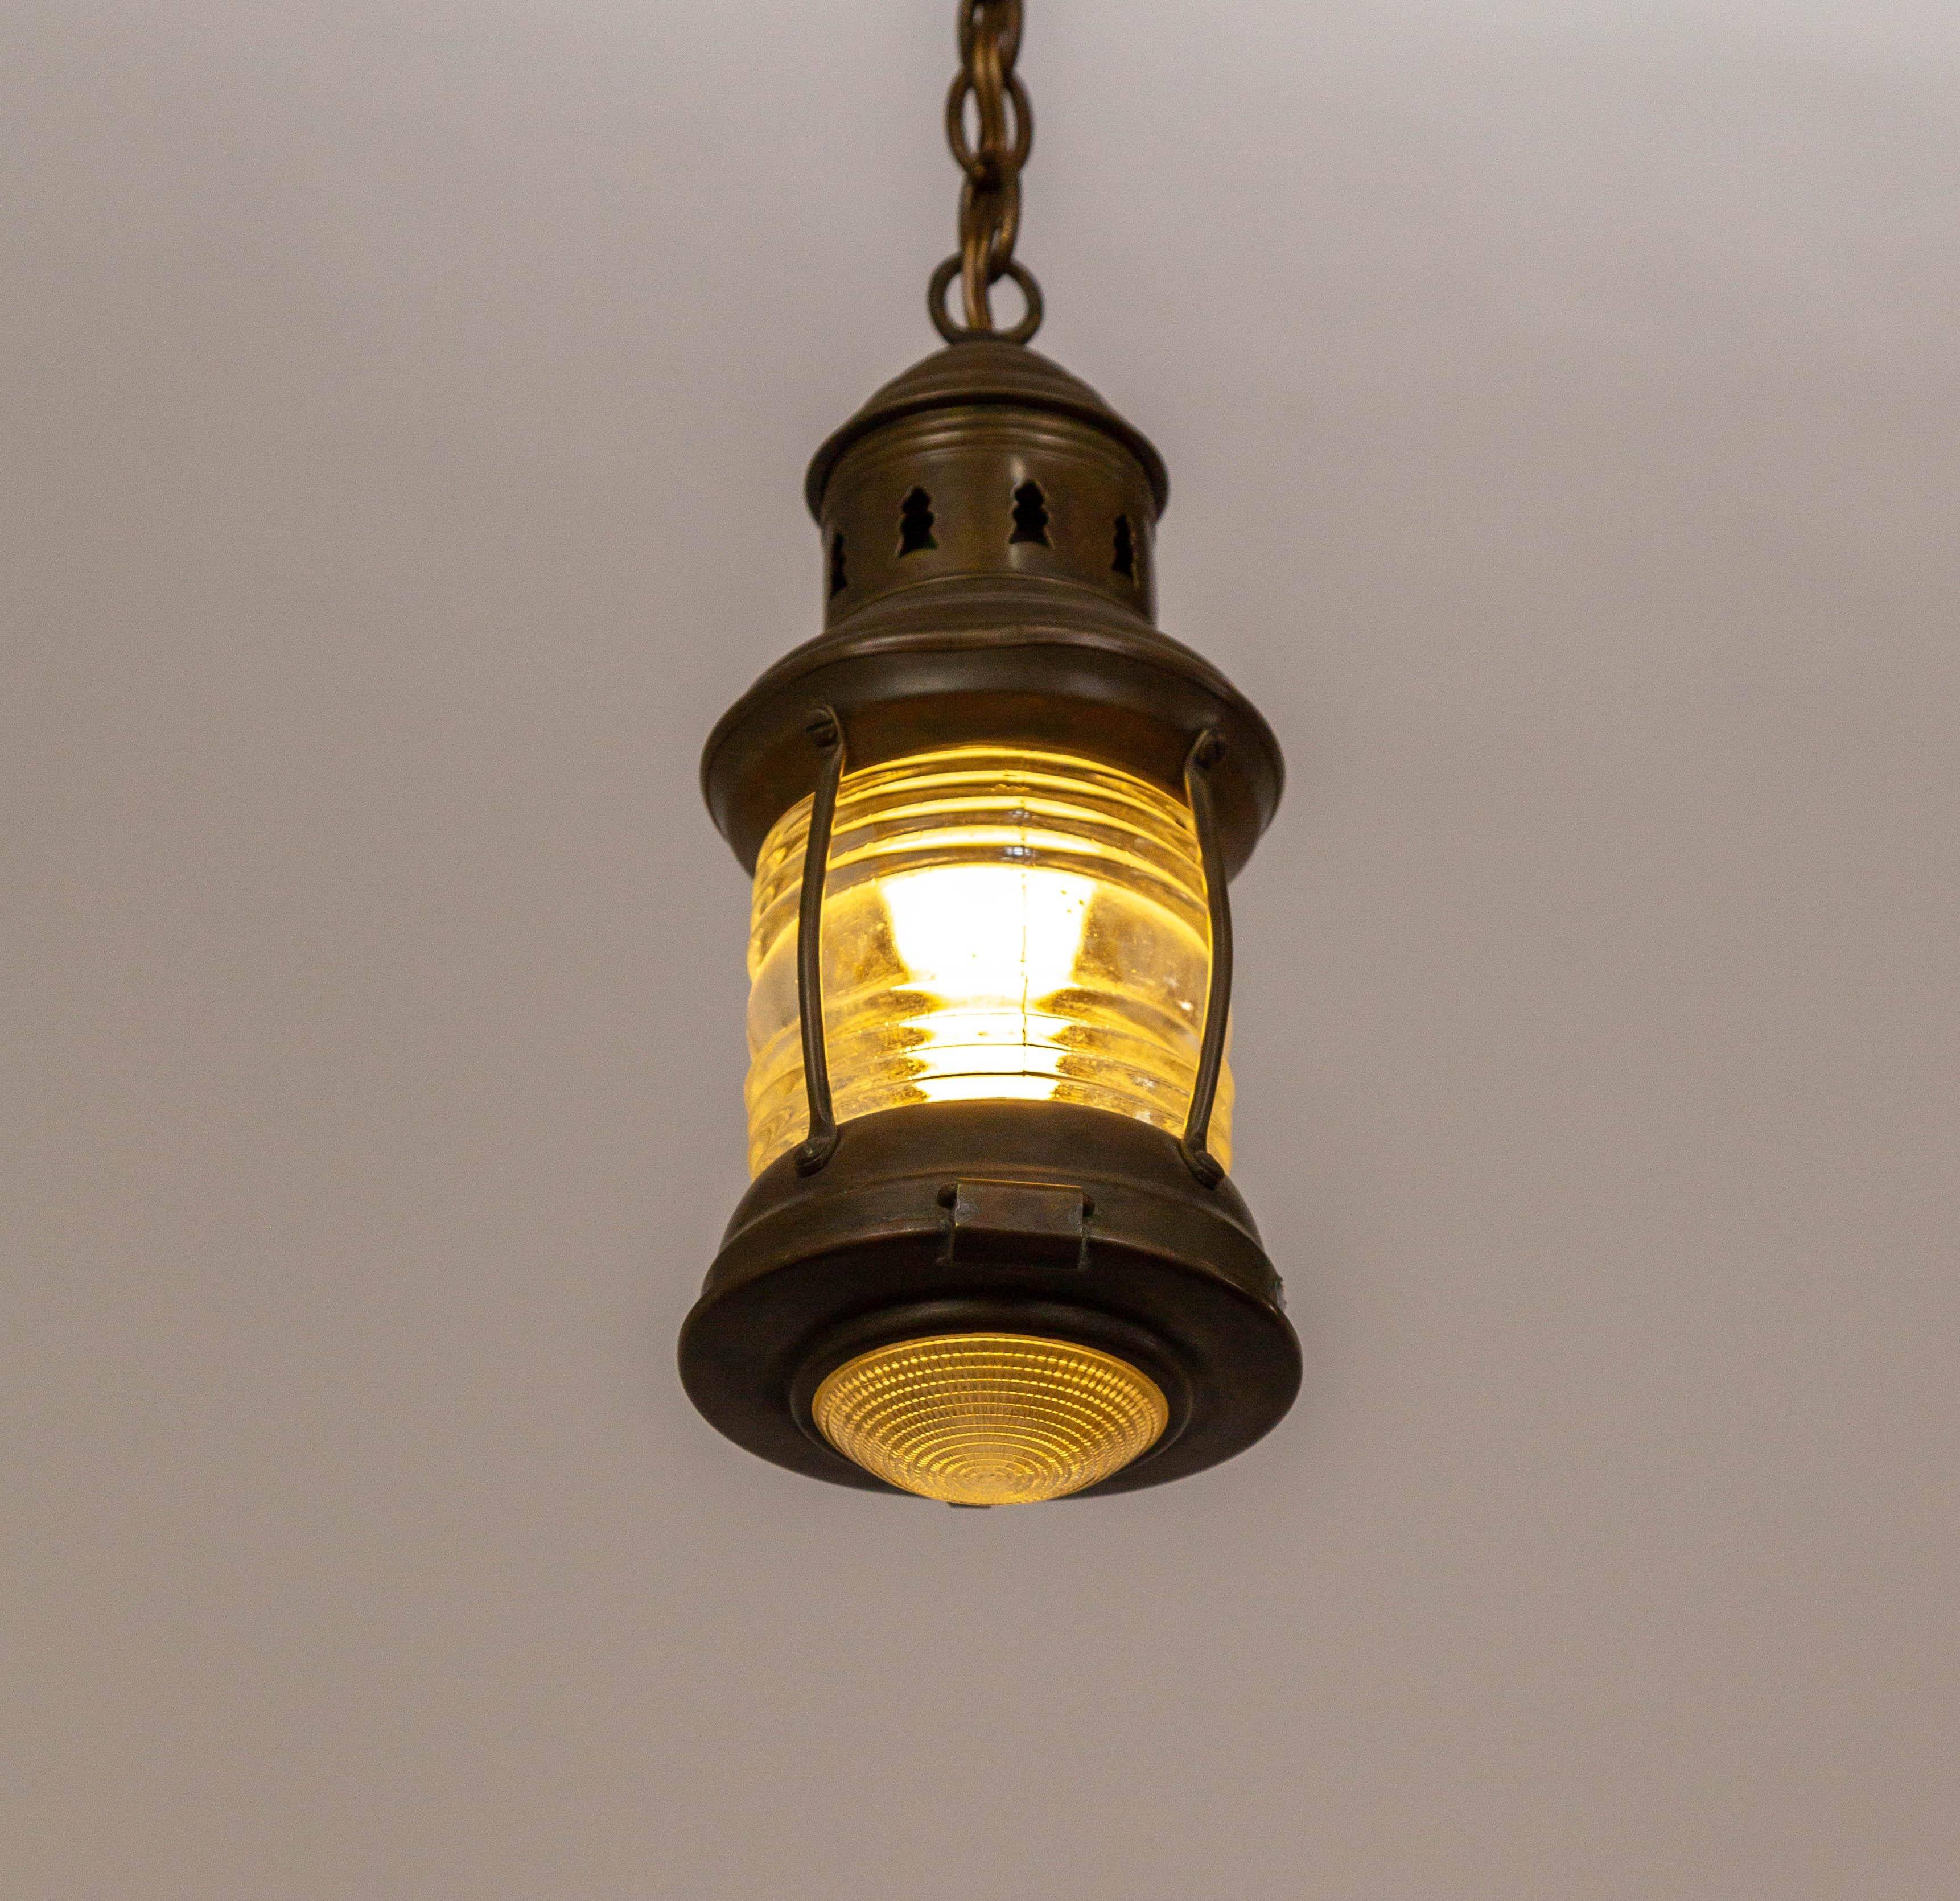 An early 20th-century hanging lantern in cylindrical form with beautiful diffusion from the Fresnel glass and textured bottom diffuser. With a bronze-toned patina and a long chain. Newly wired. 4.5